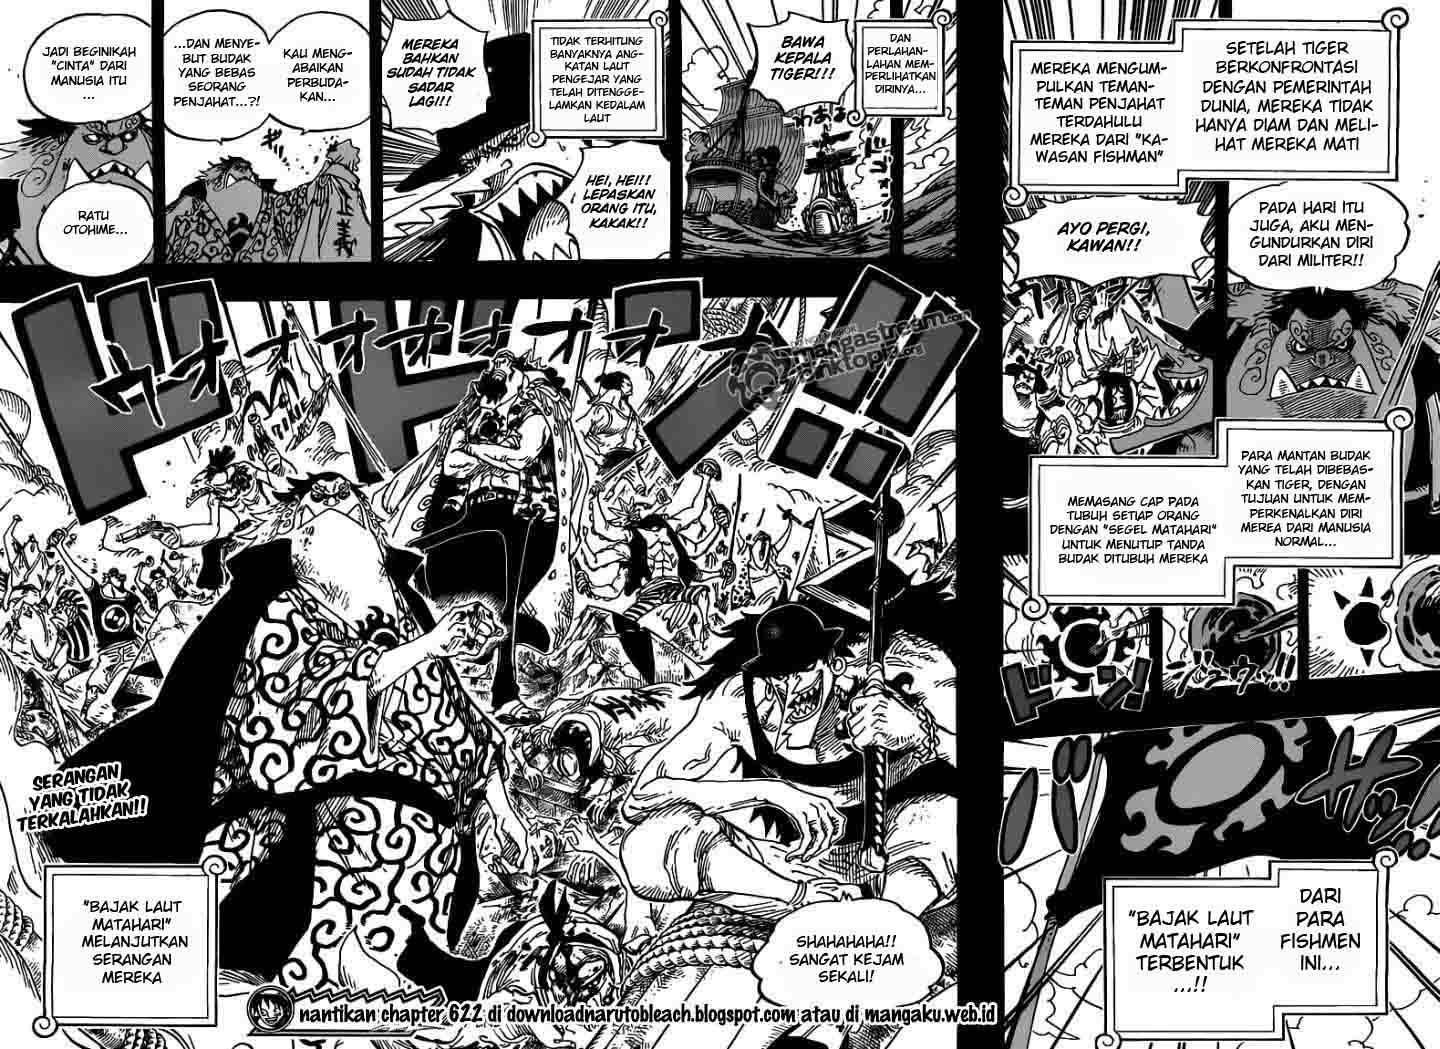 One Piece Chapter 621 – Otohime Dan Tiger - 133